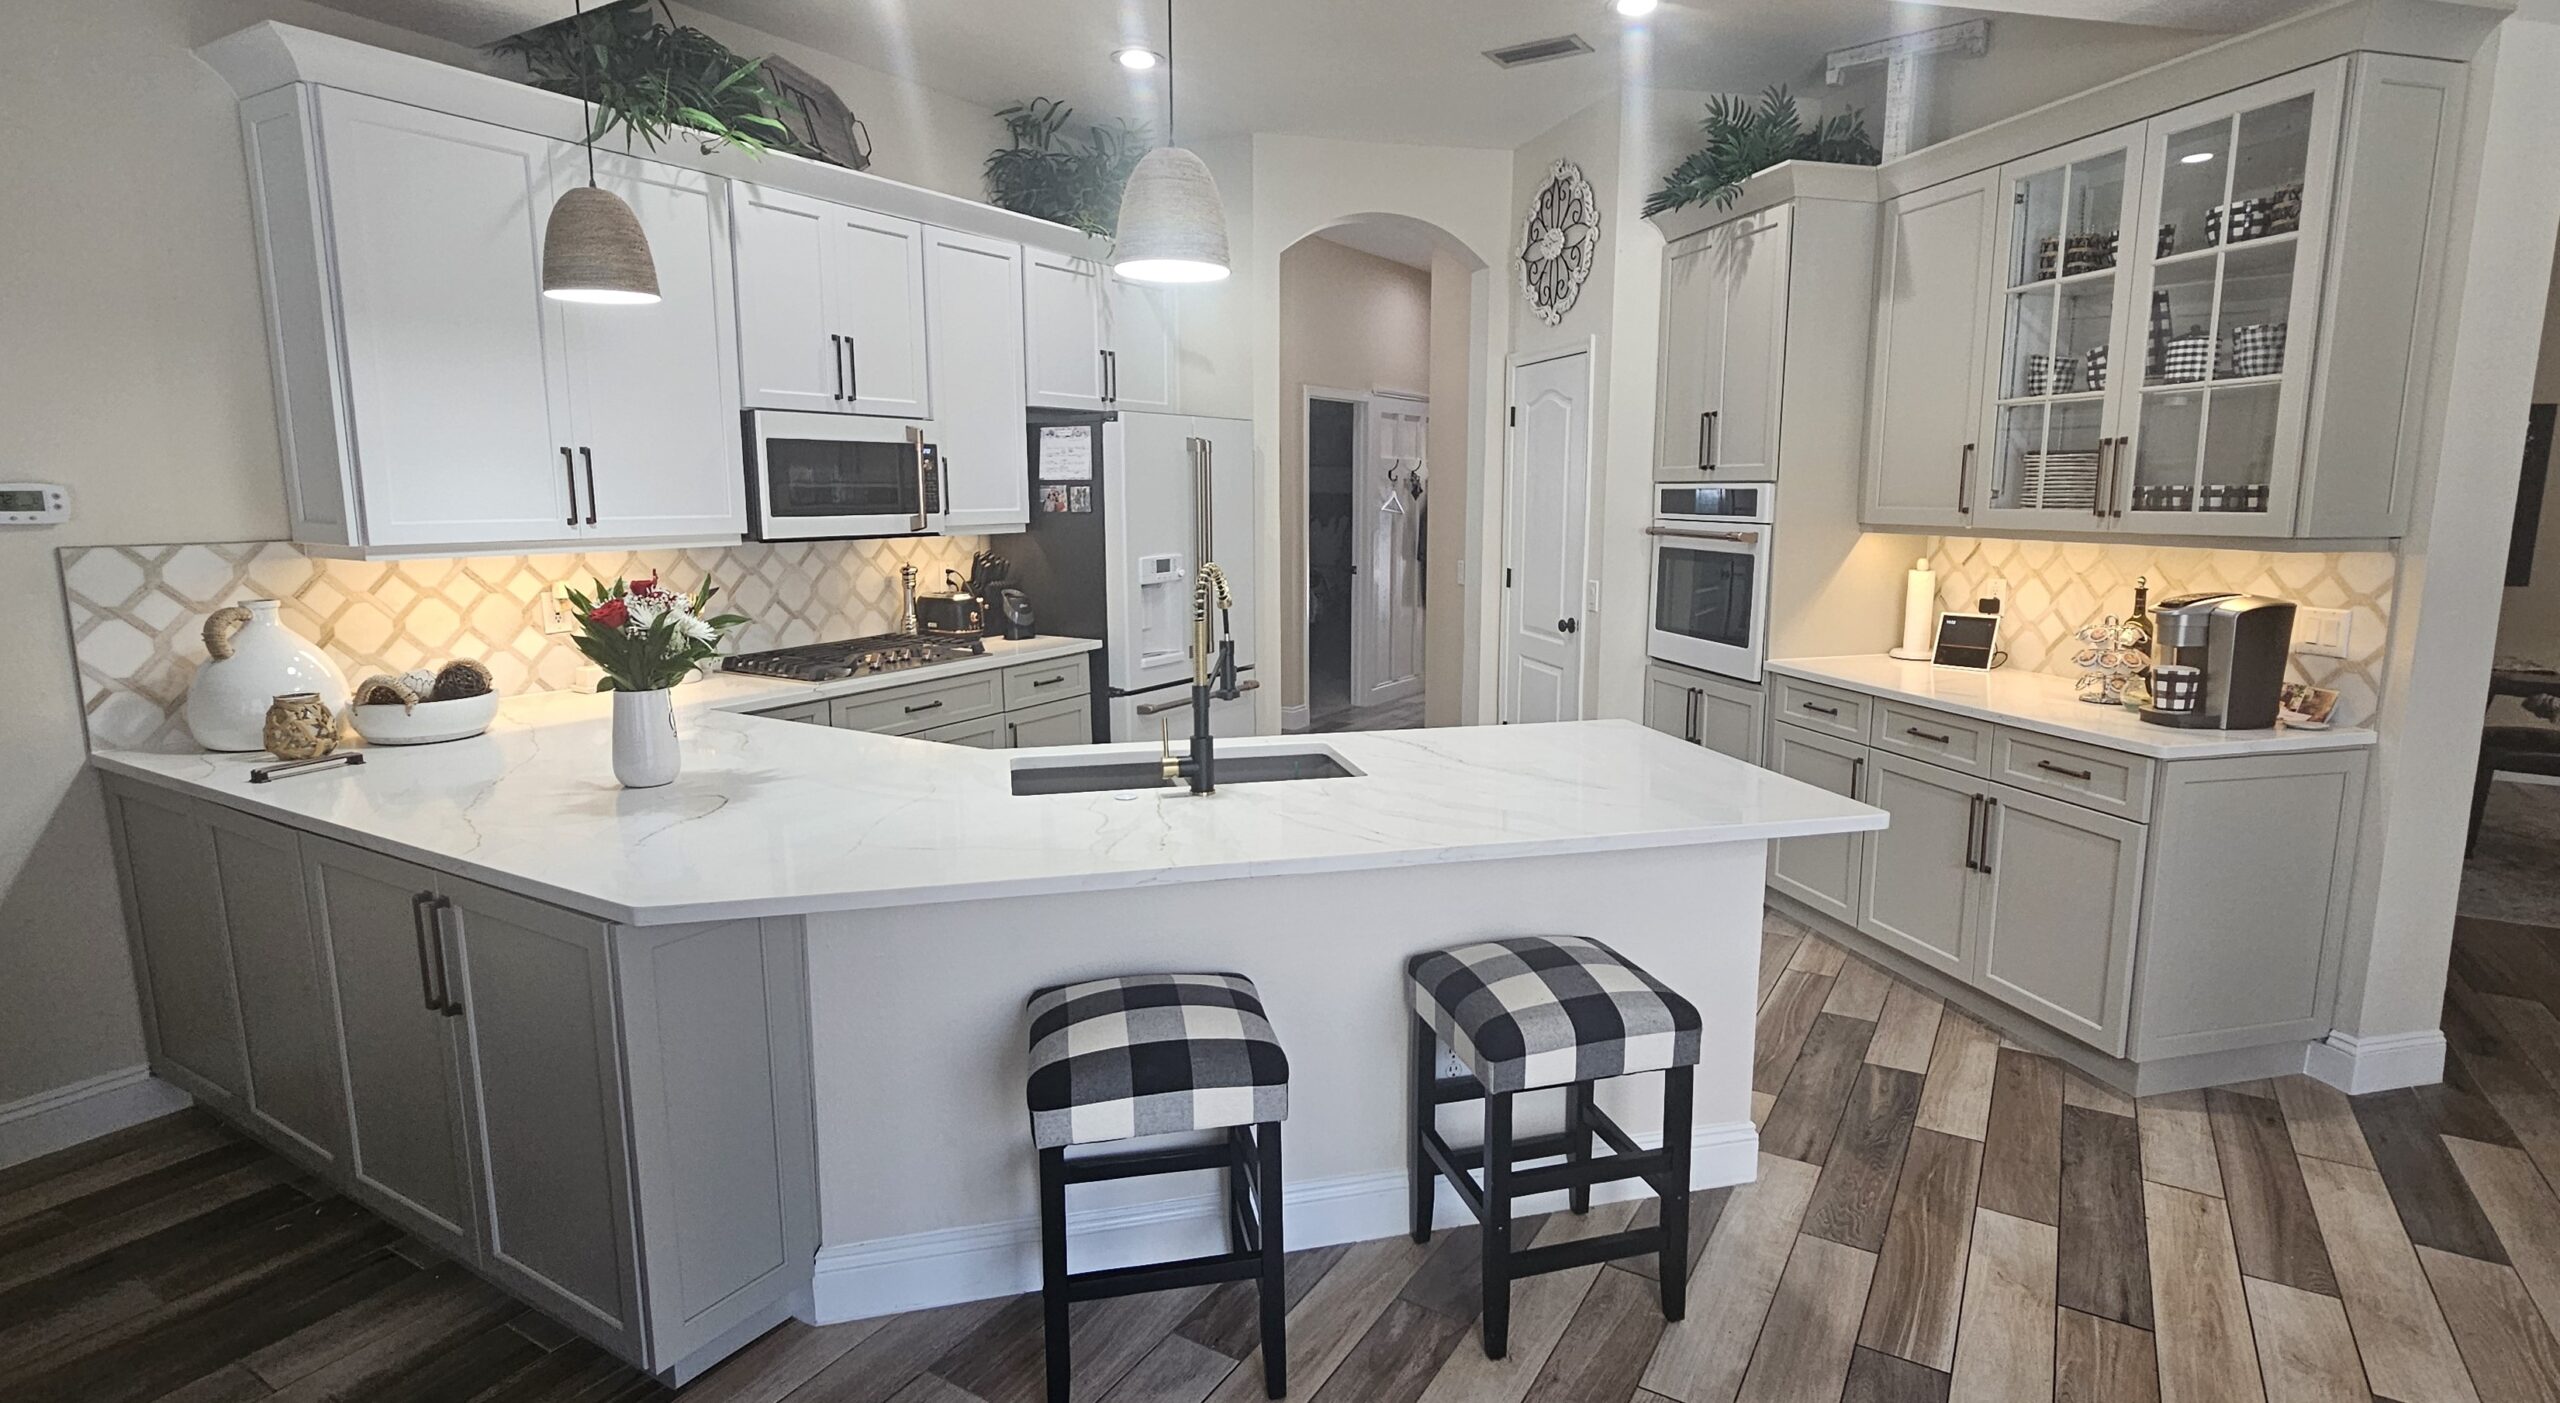 Modern appliances with a high-quality finish, granite worktops, and sleek white cabinet doors in Belleair Shores 